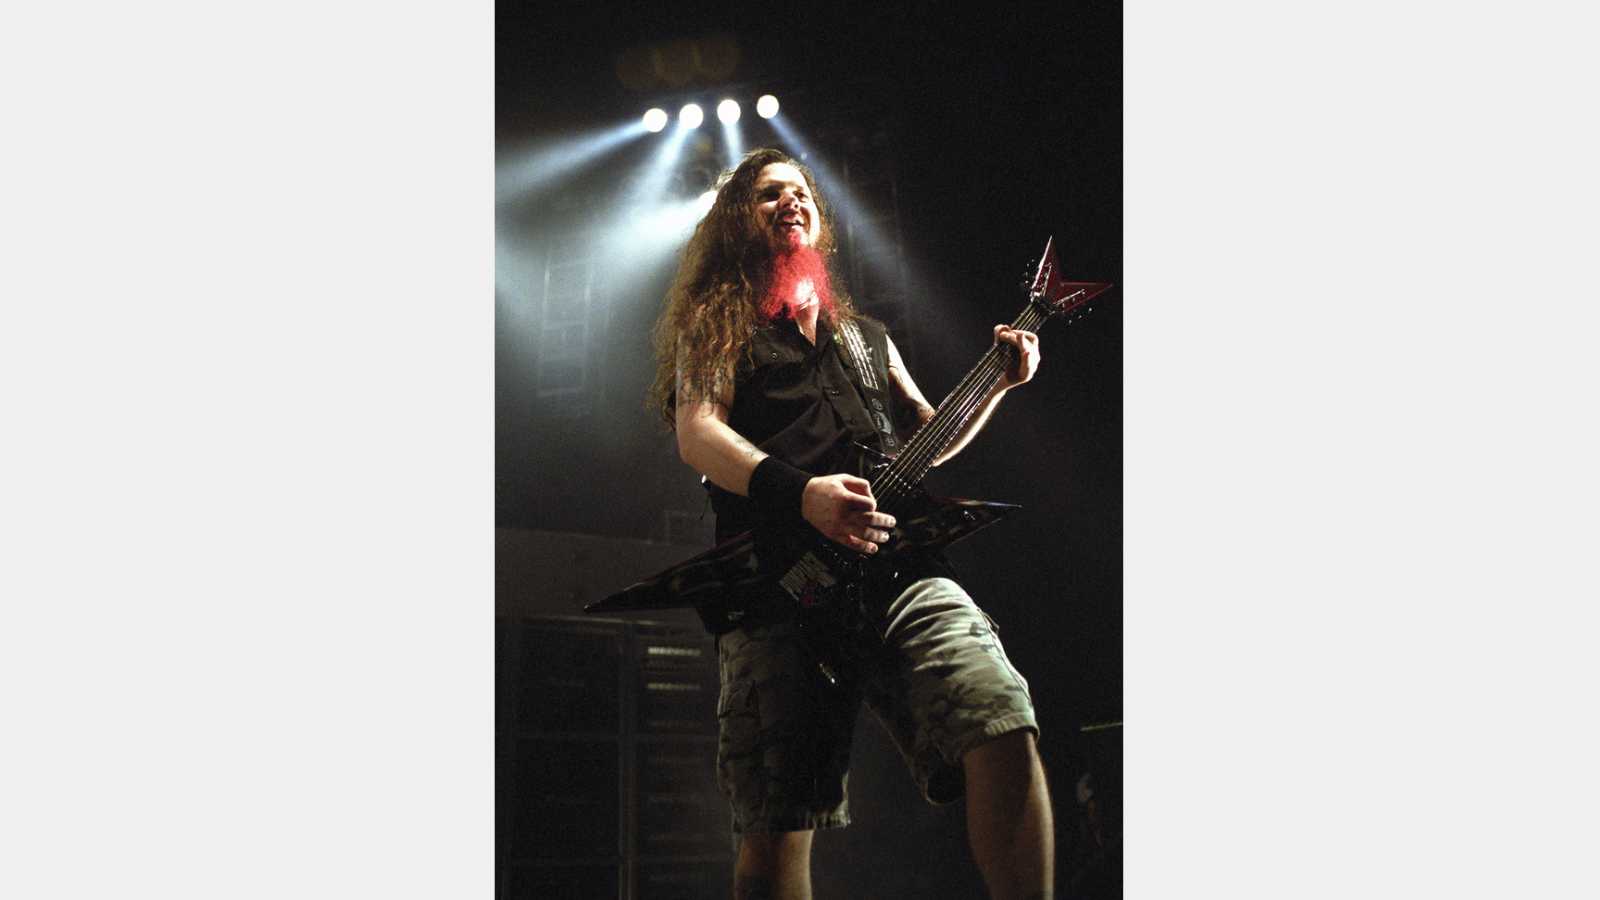 HYVINKAA, FINLAND – JUNE 3 2022: Steve Harris of Iron Maiden performing with British Lion at Rockfest music festival